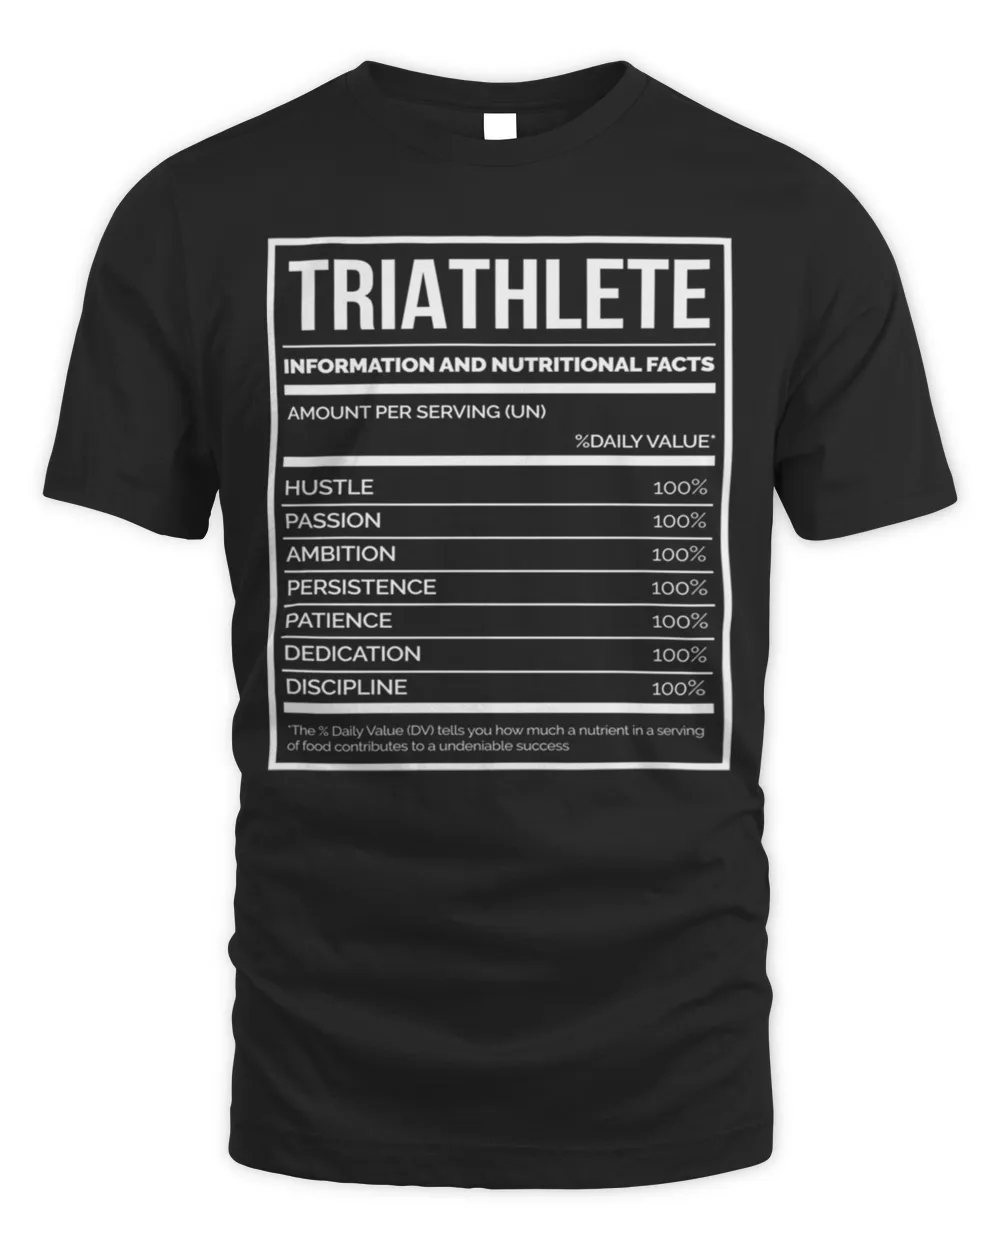 Triathlete nutritional facts